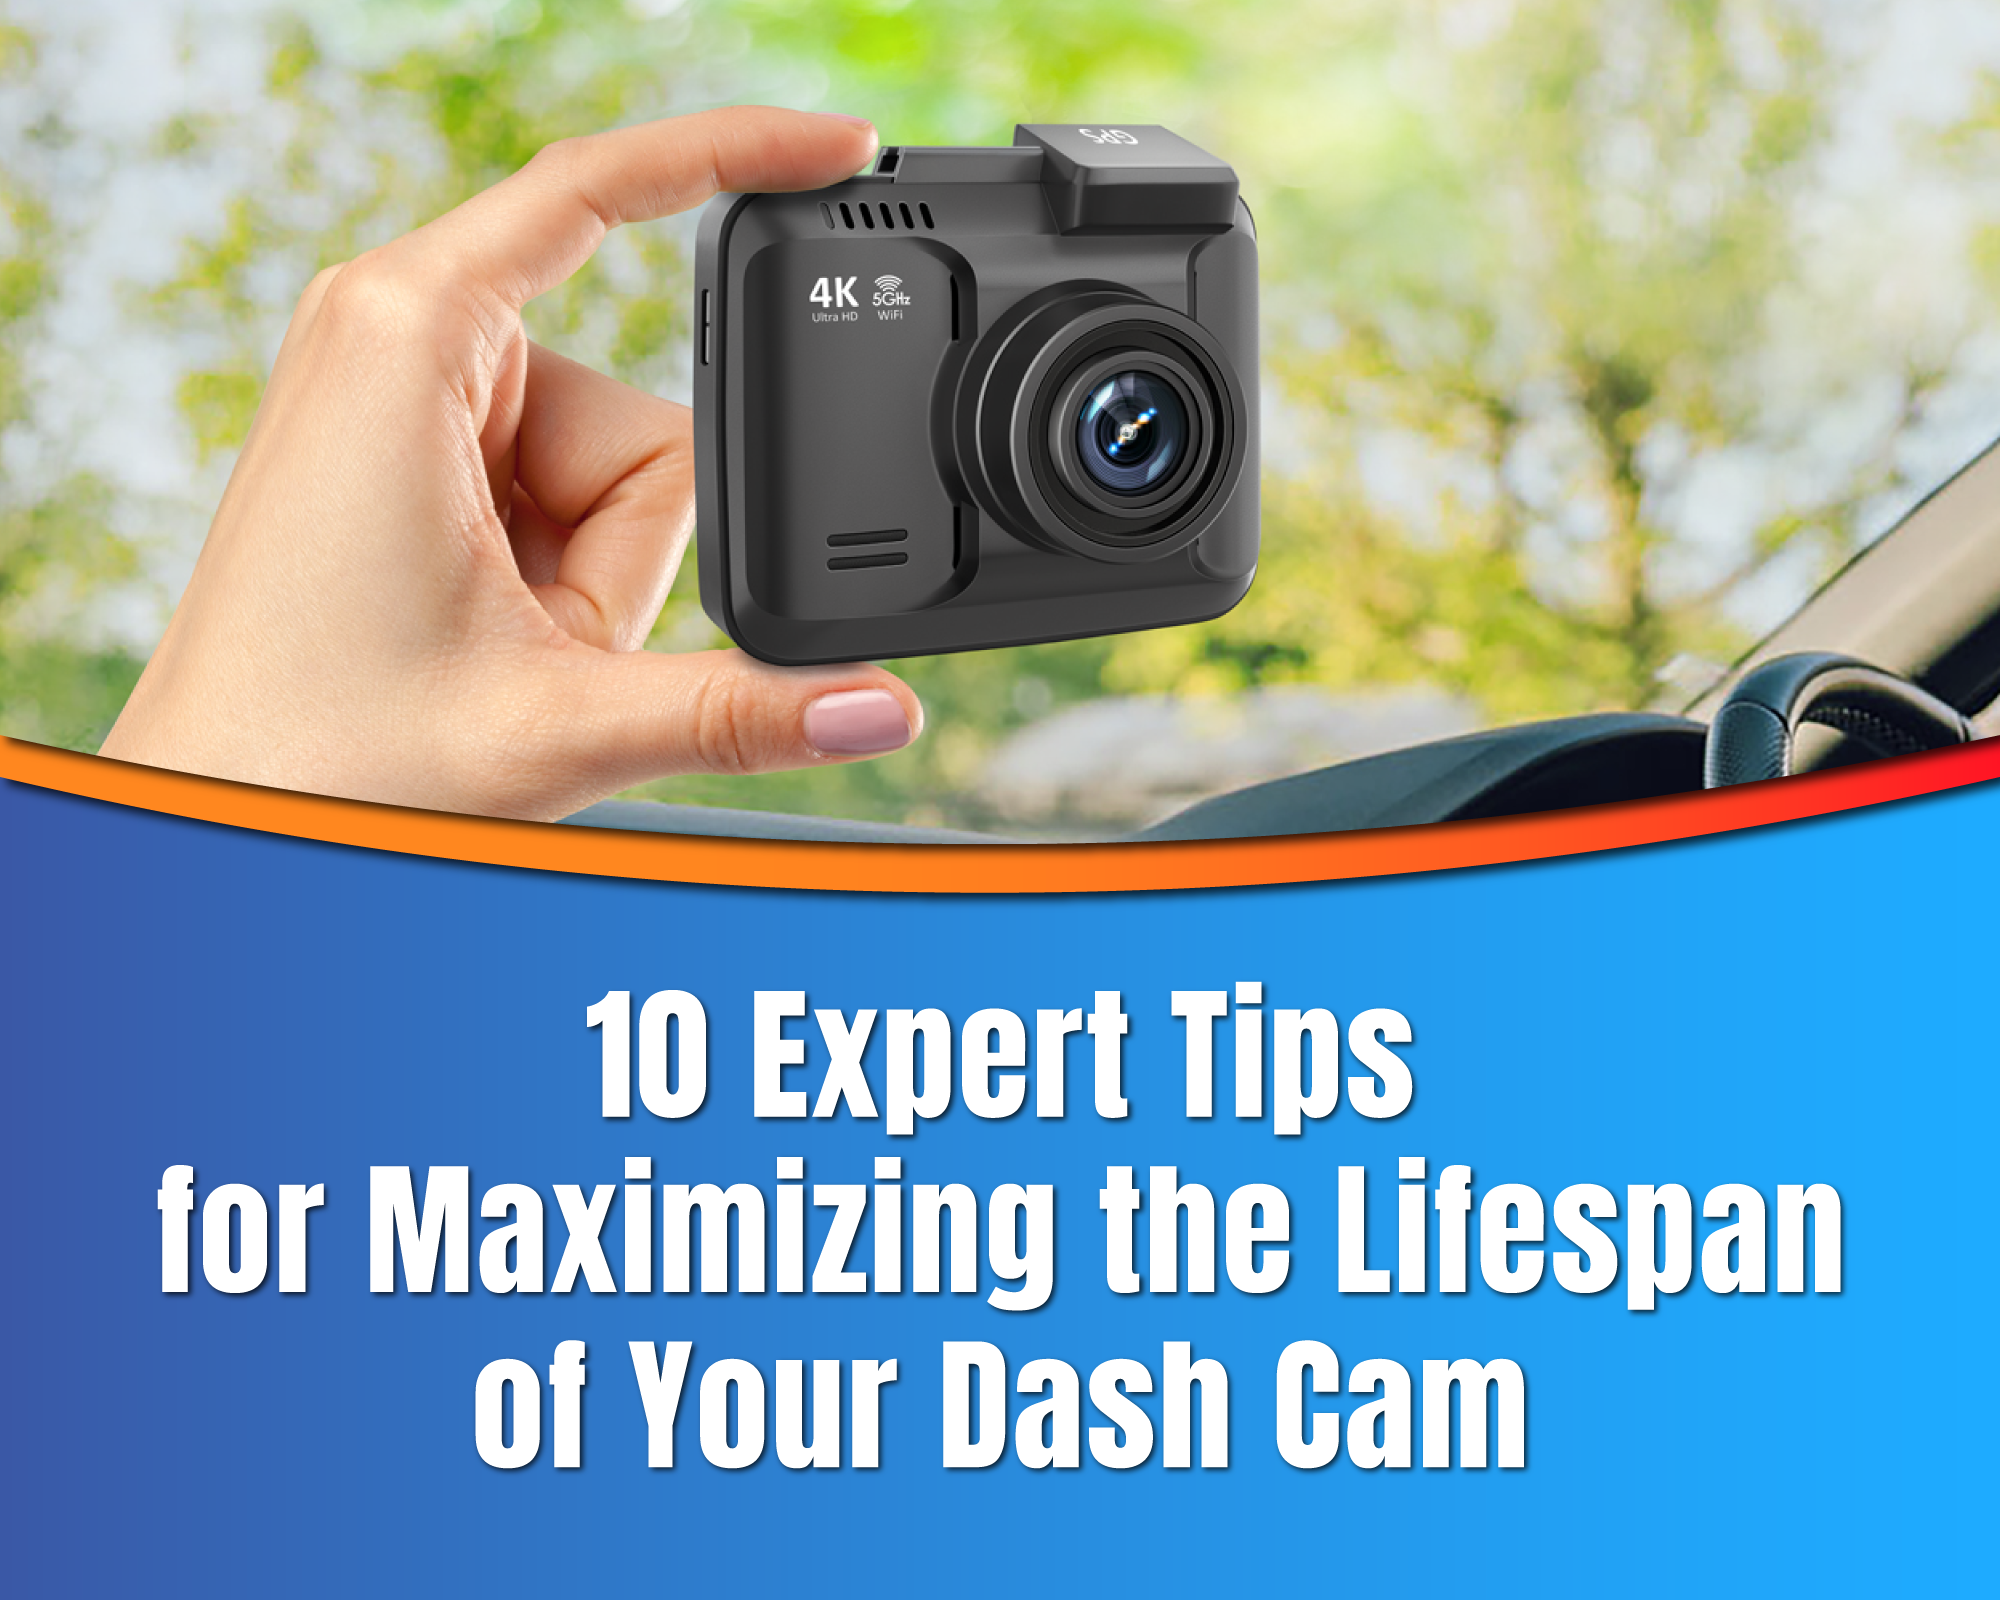 10 Expert Tips for Maximizing the Lifespan of Your Dash Cam